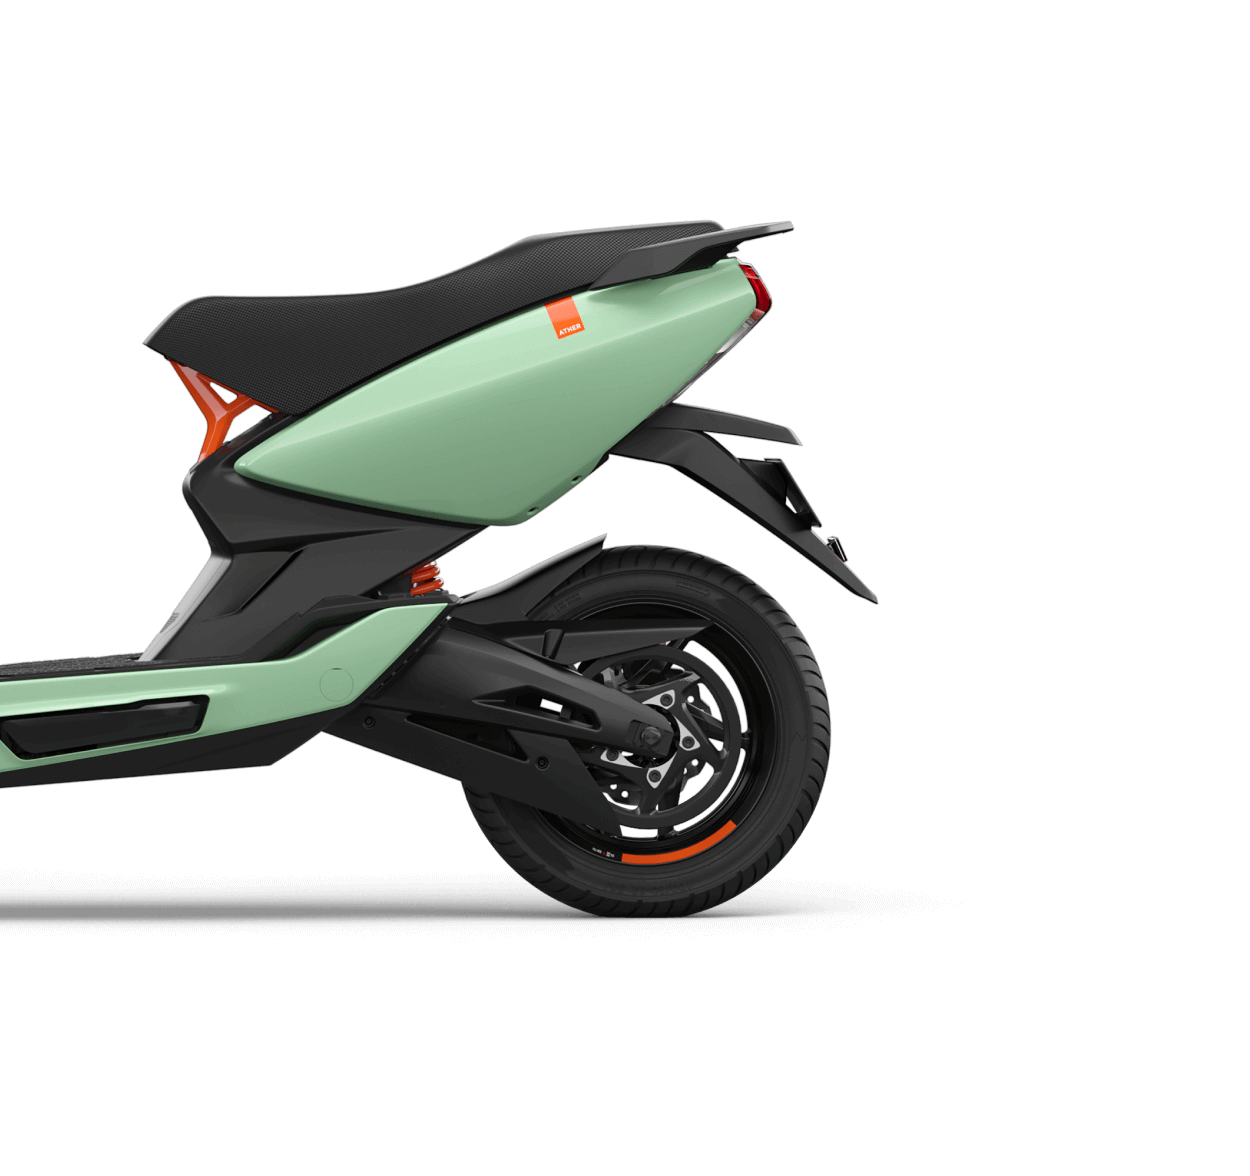 ather electric scooter salt green colour